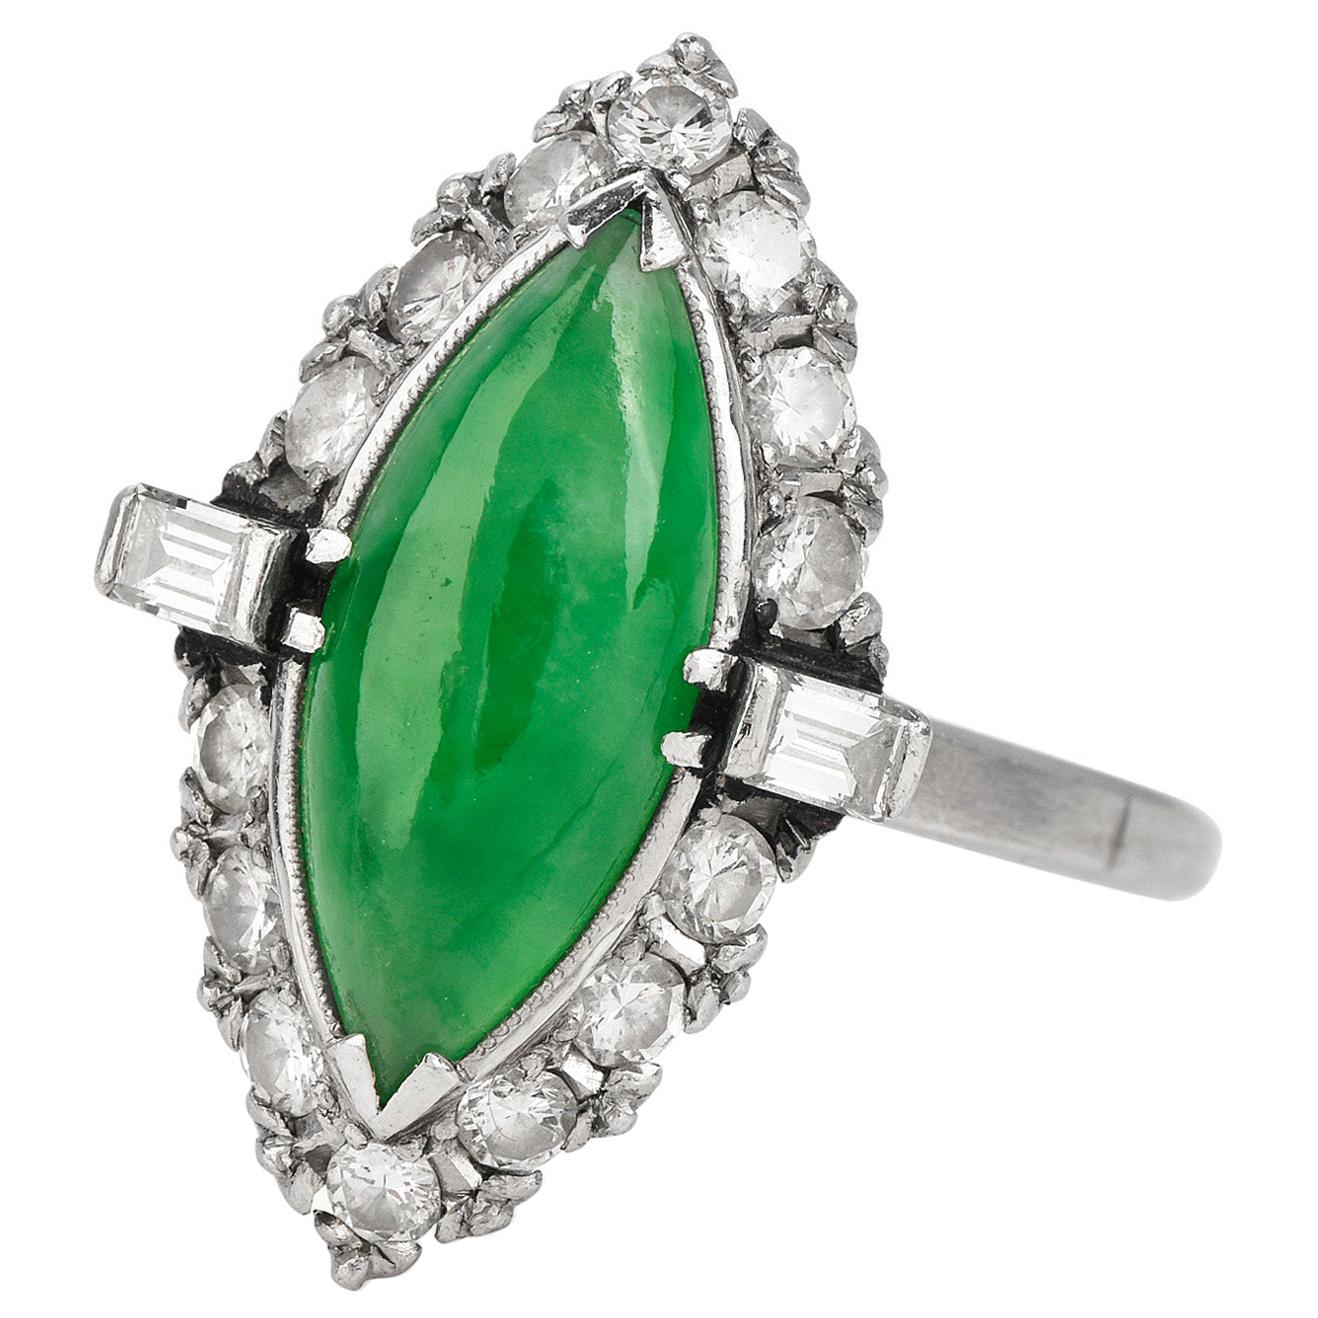 Exquisite Vintage GIA Certified Jade and Diamond Navette Style Ring are characterized by the Vibrant Apple Green of the center stone.

Carefully crafted in solid platinum and with a total weight of approximately 6.30 grams,

This Antique deco ring